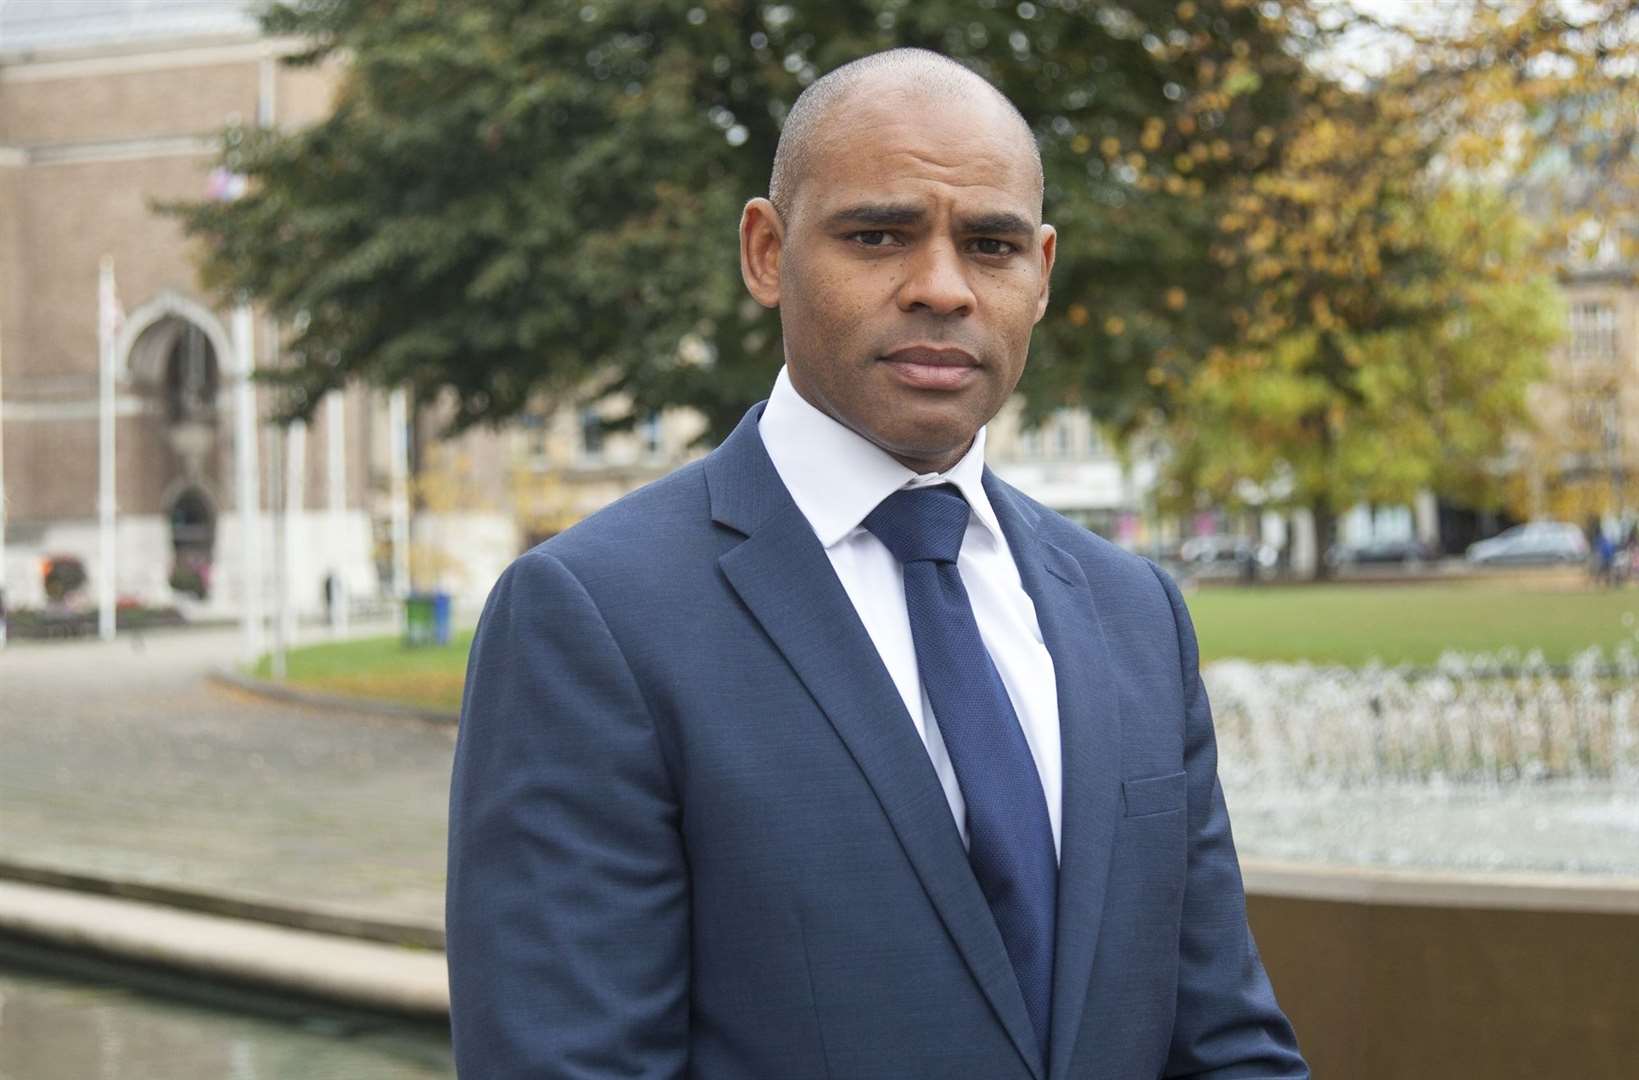 Spence sent the ‘offensive’ emails to Bristol Mayor Marvin Rees (PA)